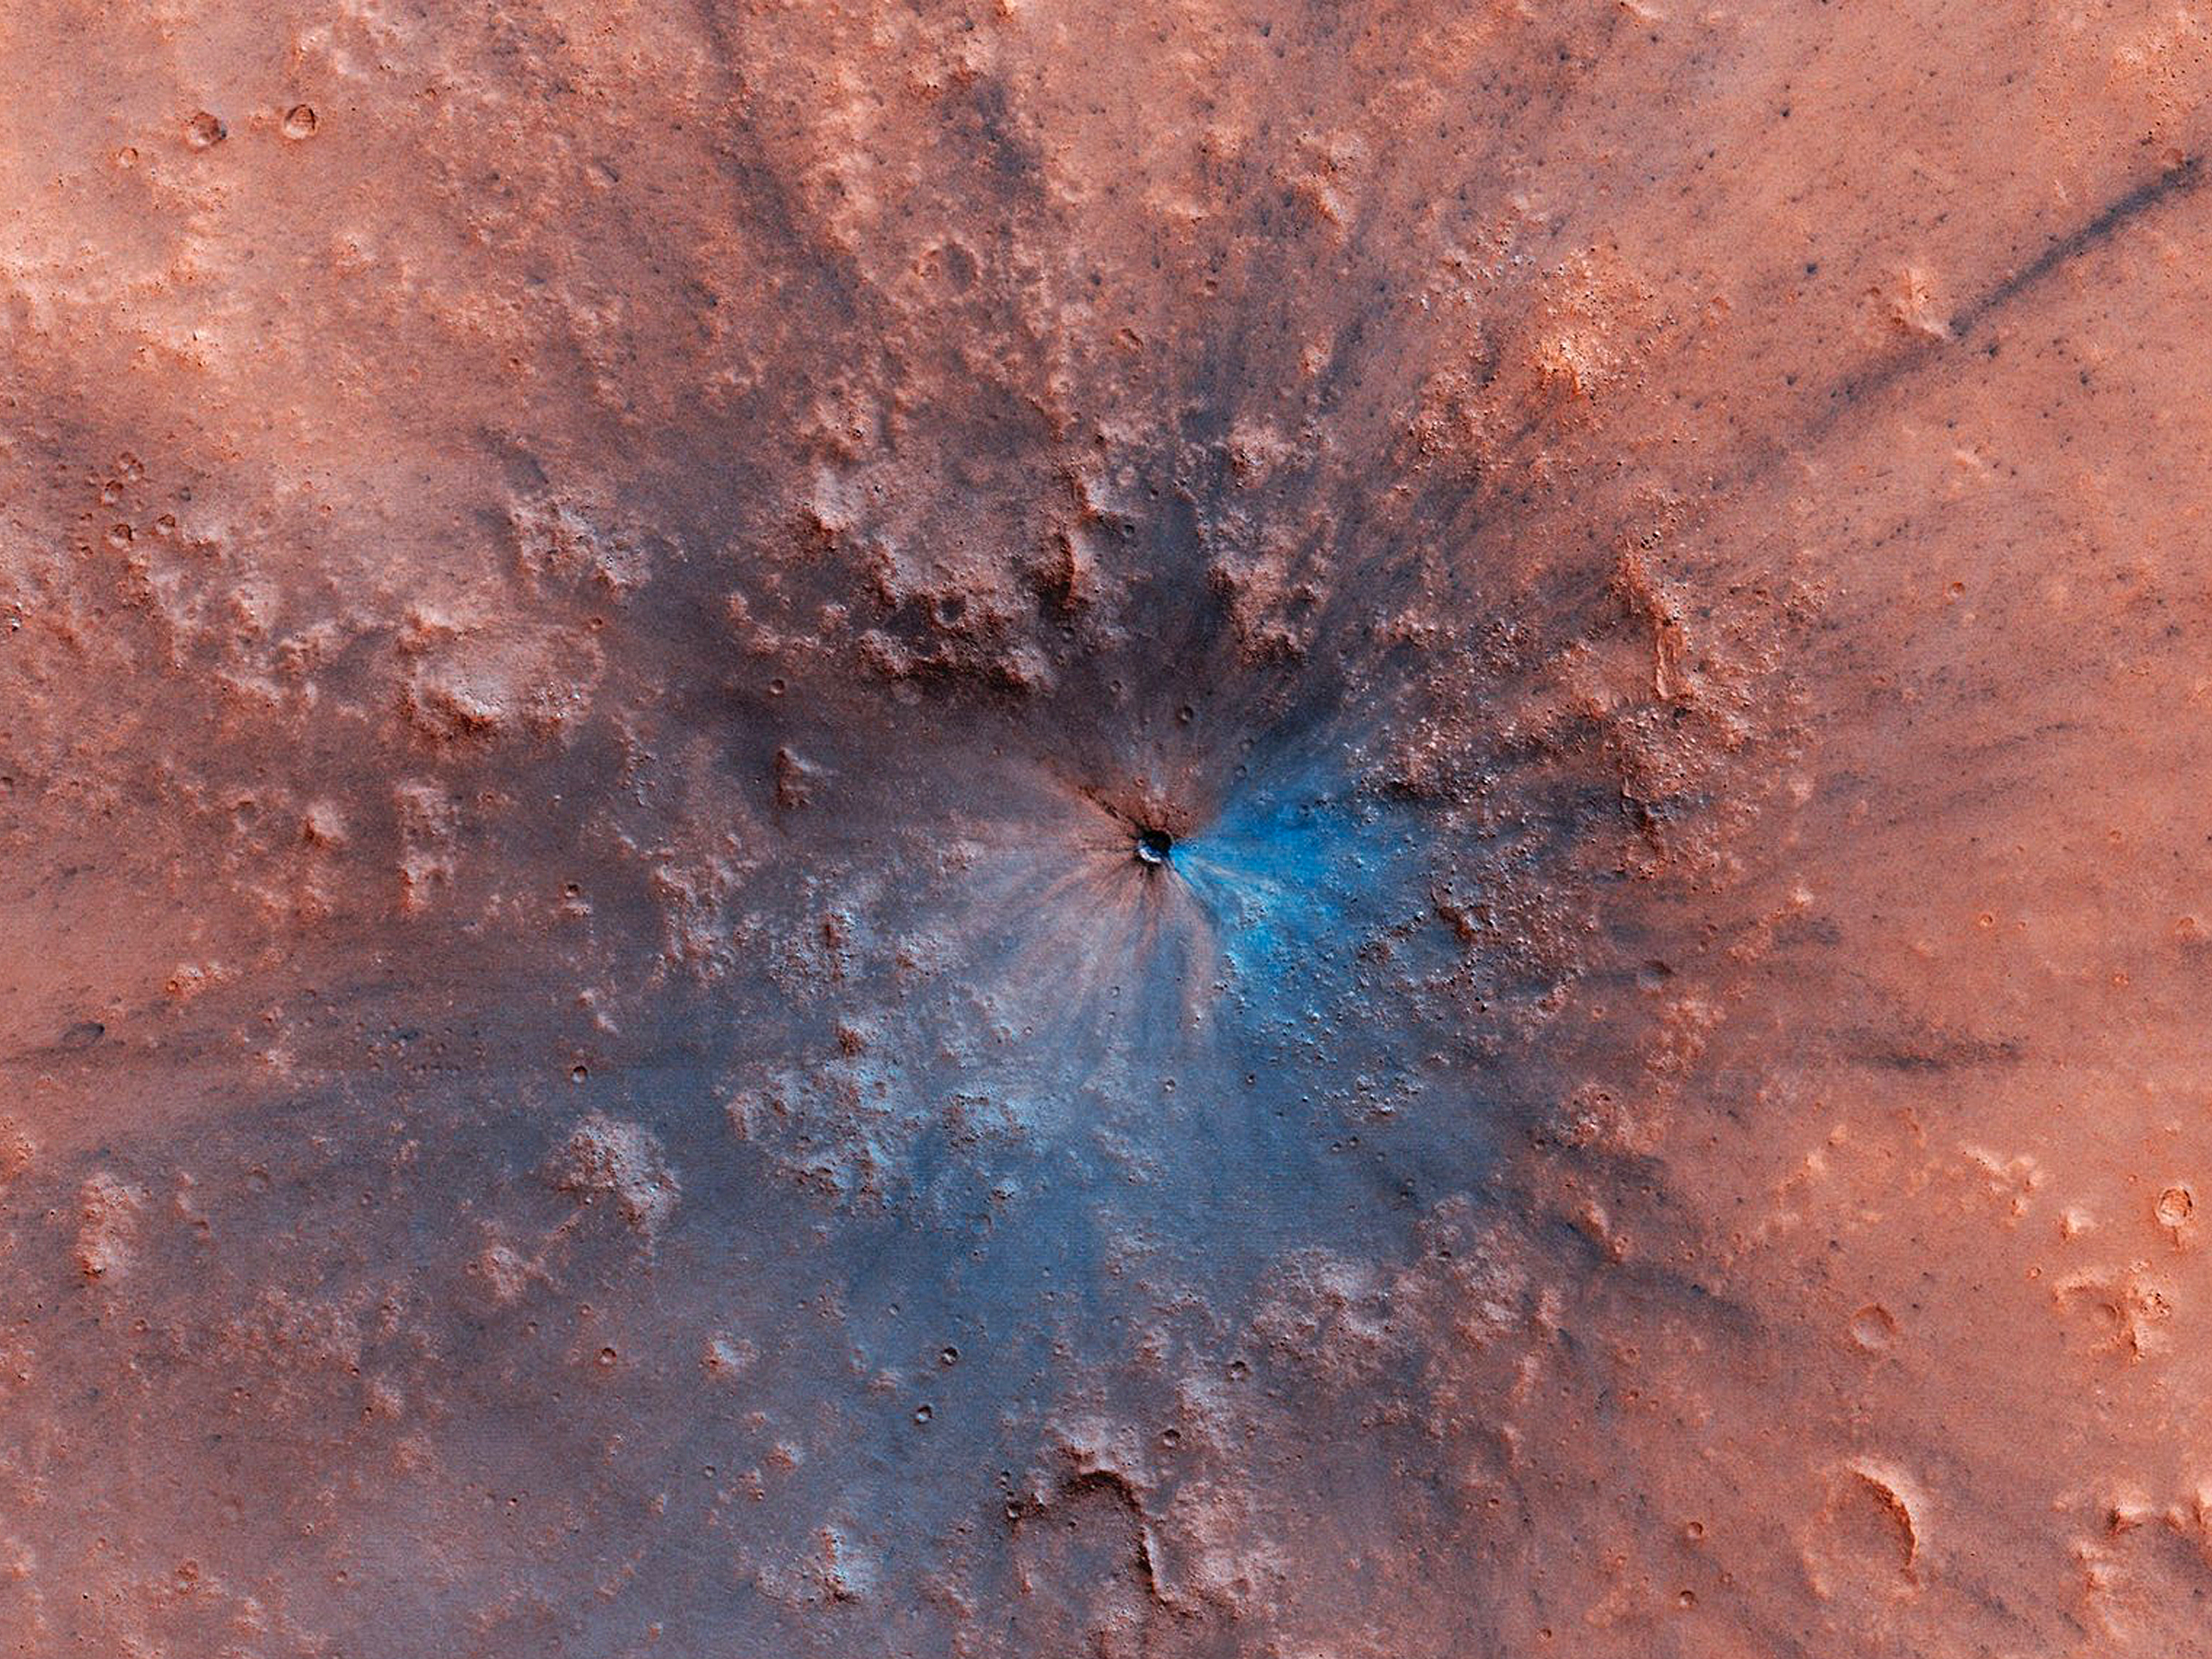 A new crater on Mars, which appeared sometime between September 2016 and February 2019, shows up as a dark smudge on the landscape in this high-resolution photo from the Mars Reconnaissance Orbiter.